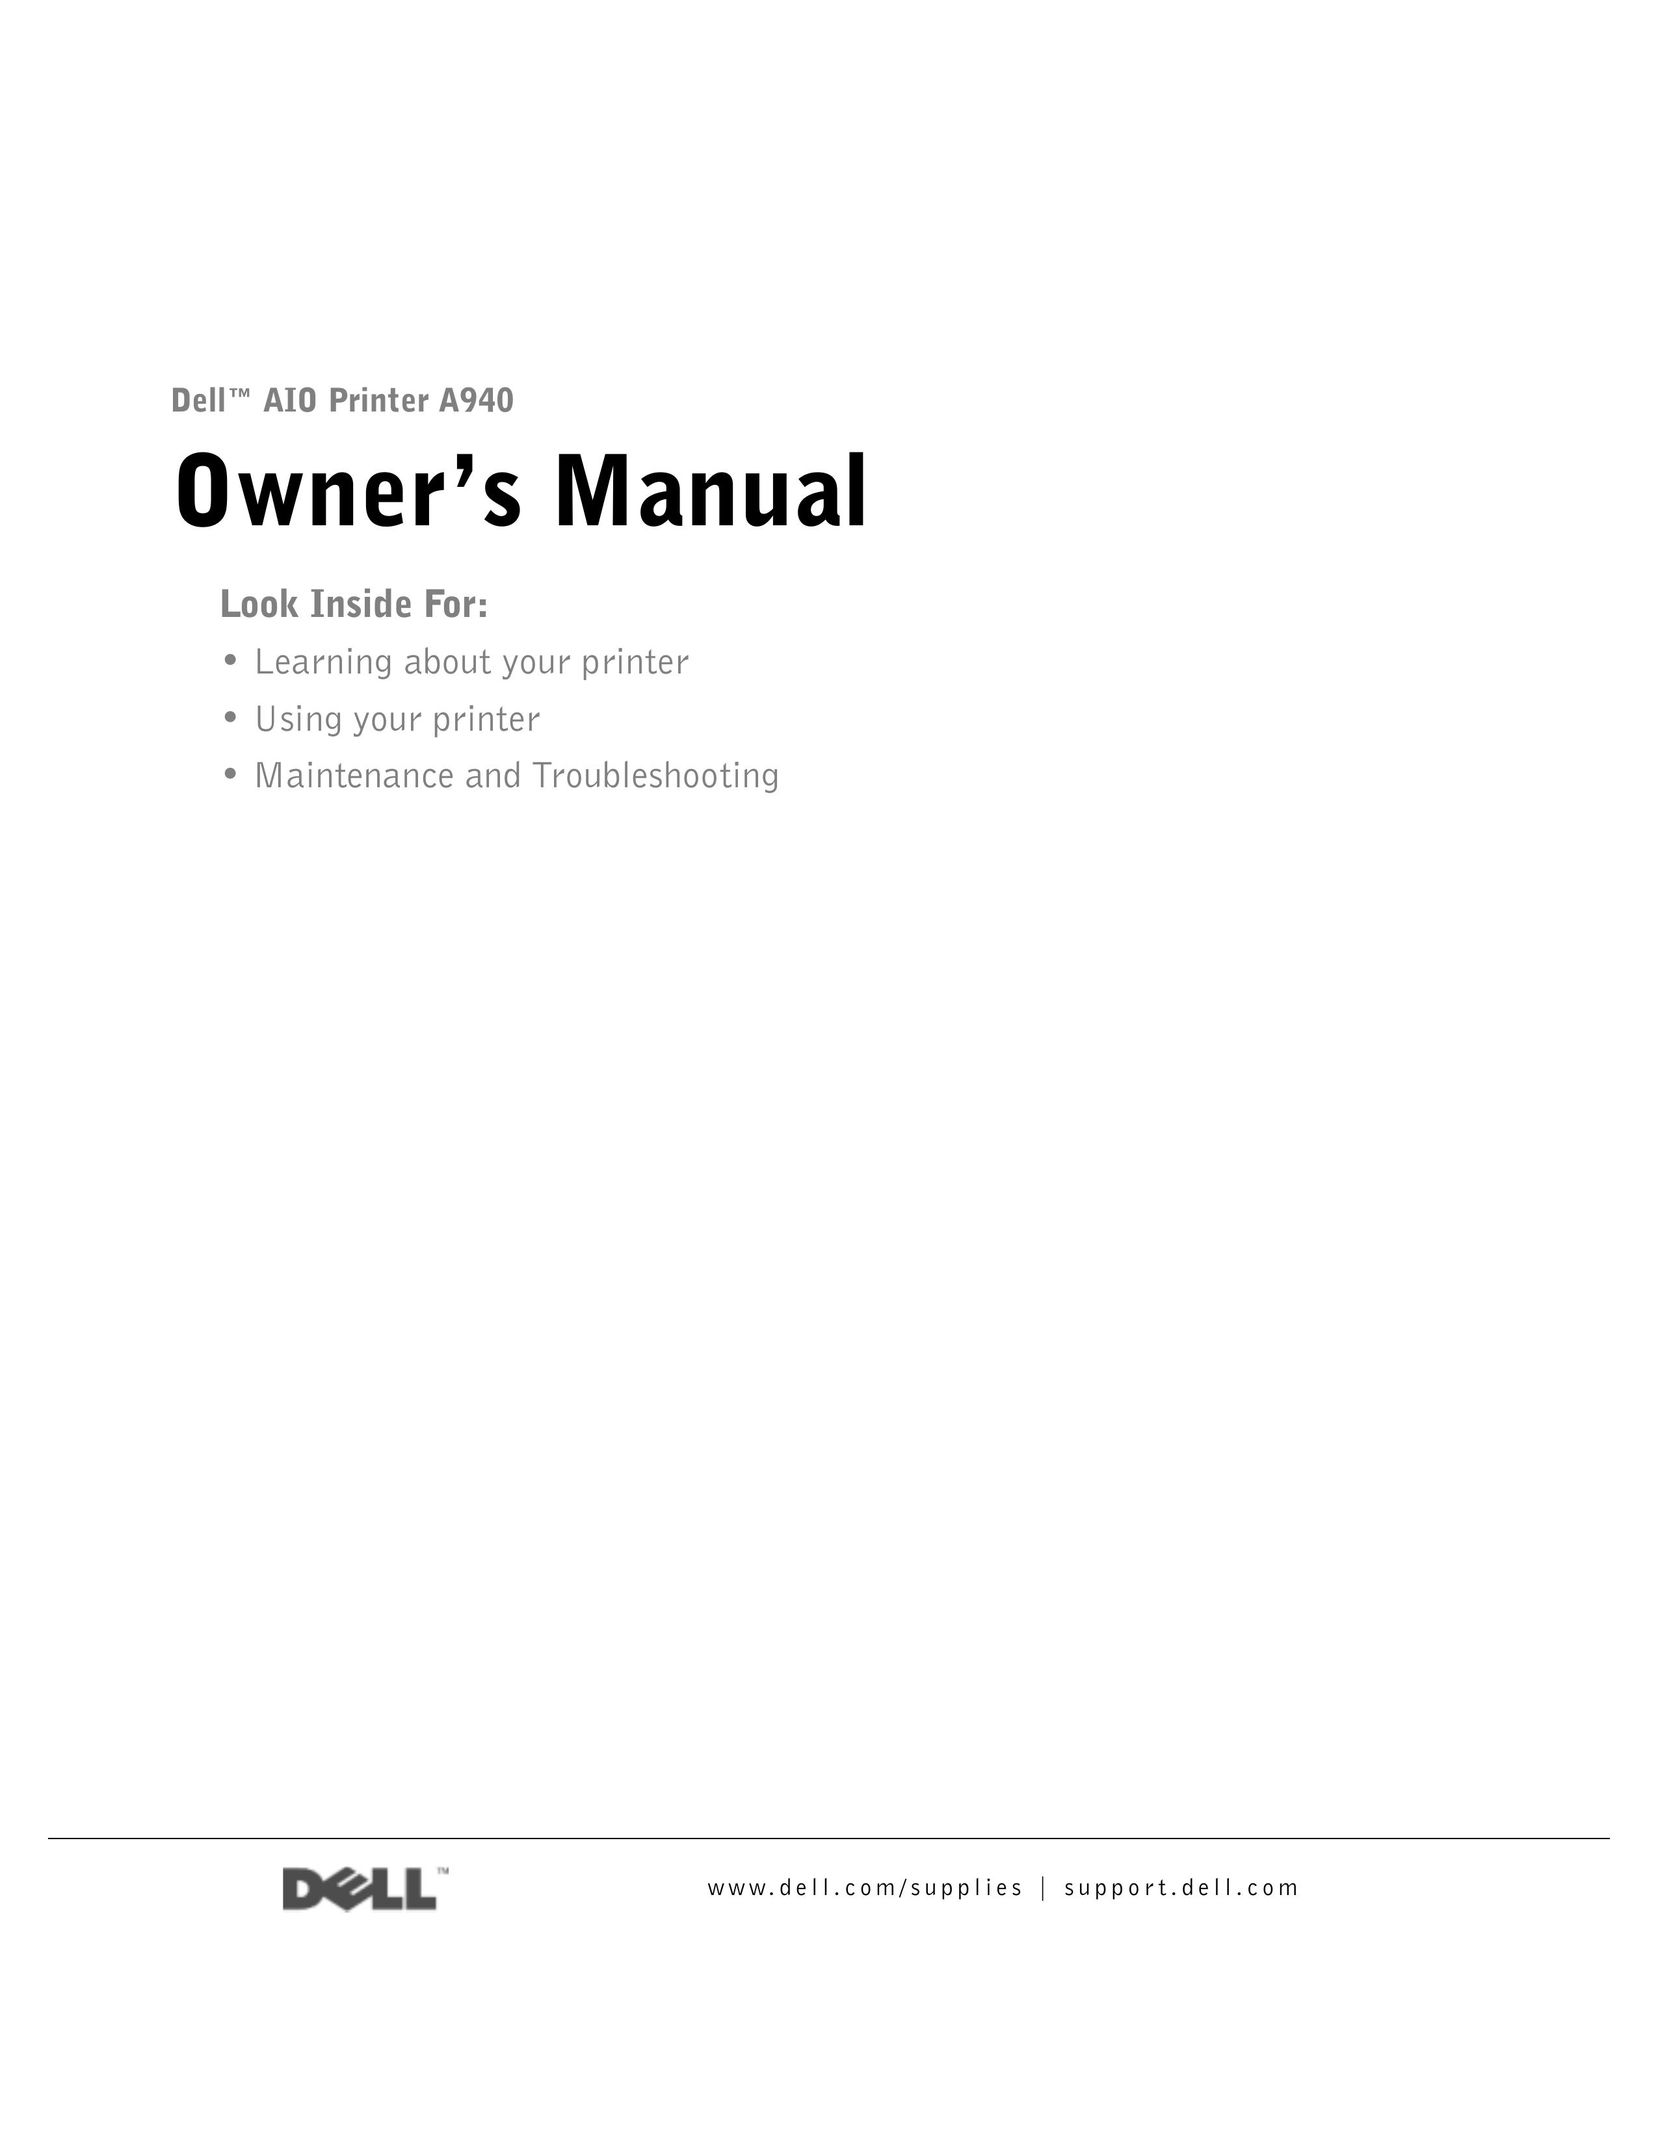 Dell A940 Scanner User Manual